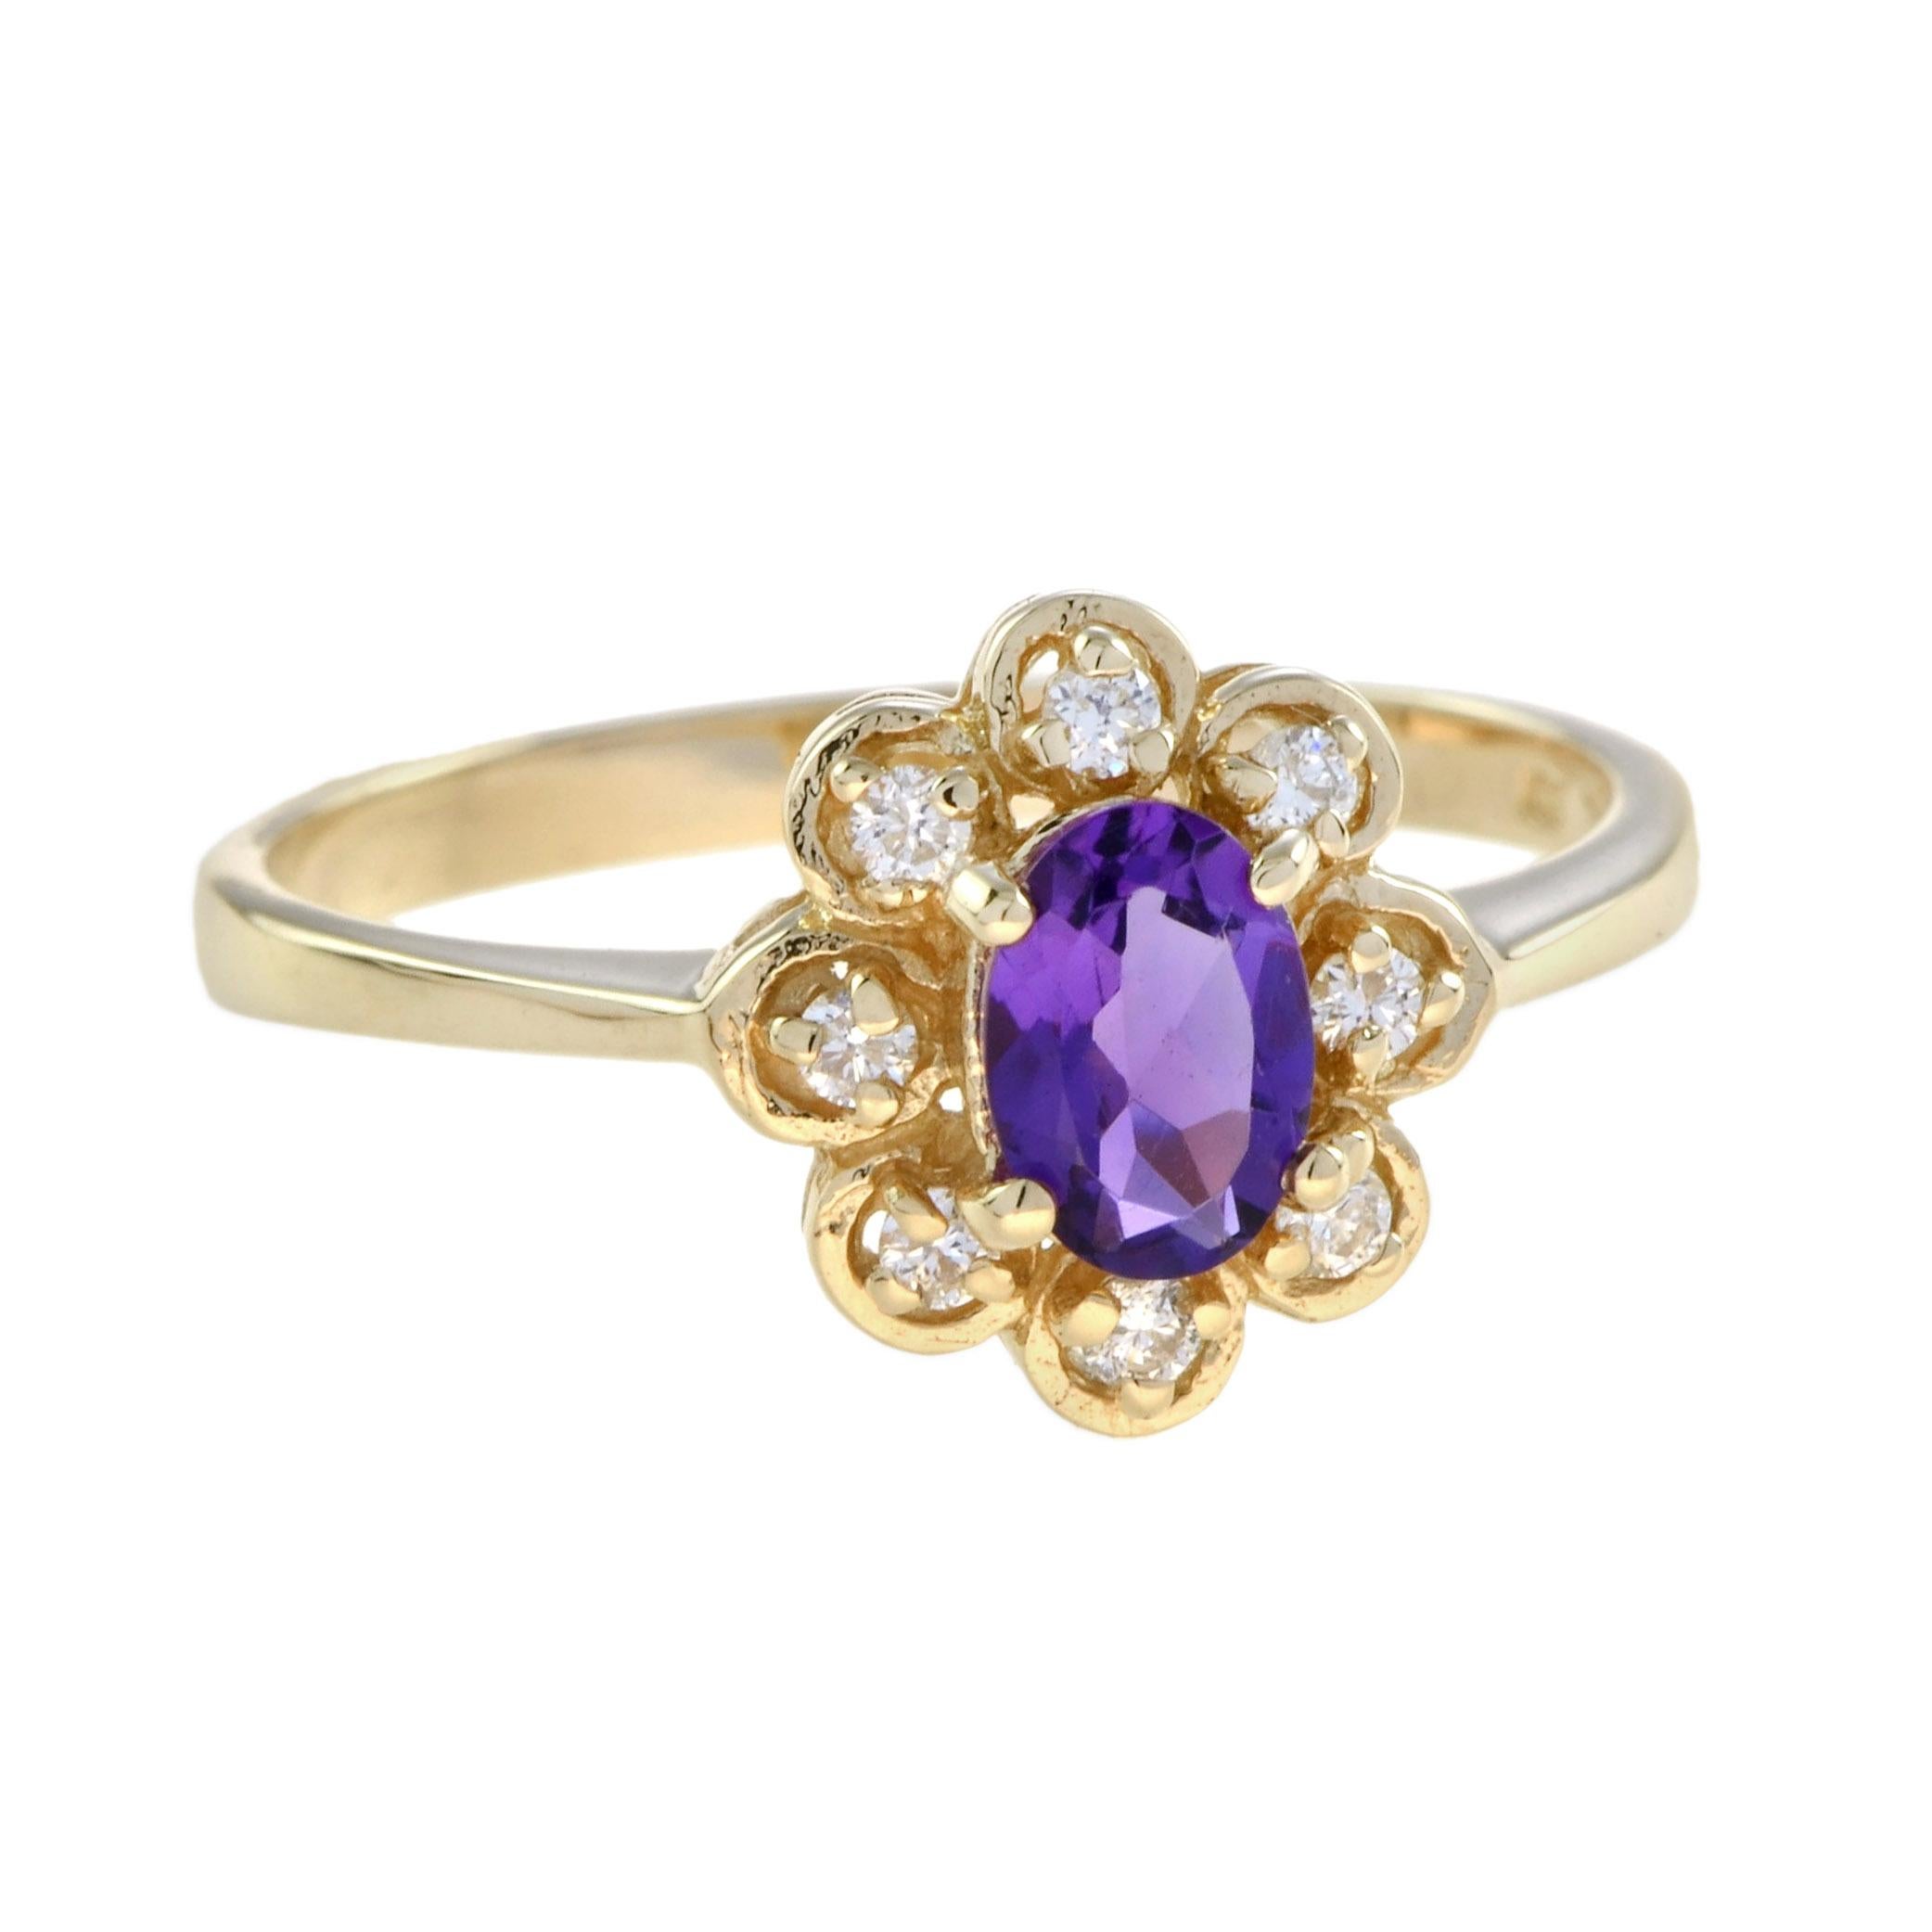 For Sale:  Vintage Style Amethyst and Diamond Halo Ring in 14K Yellow Gold 2